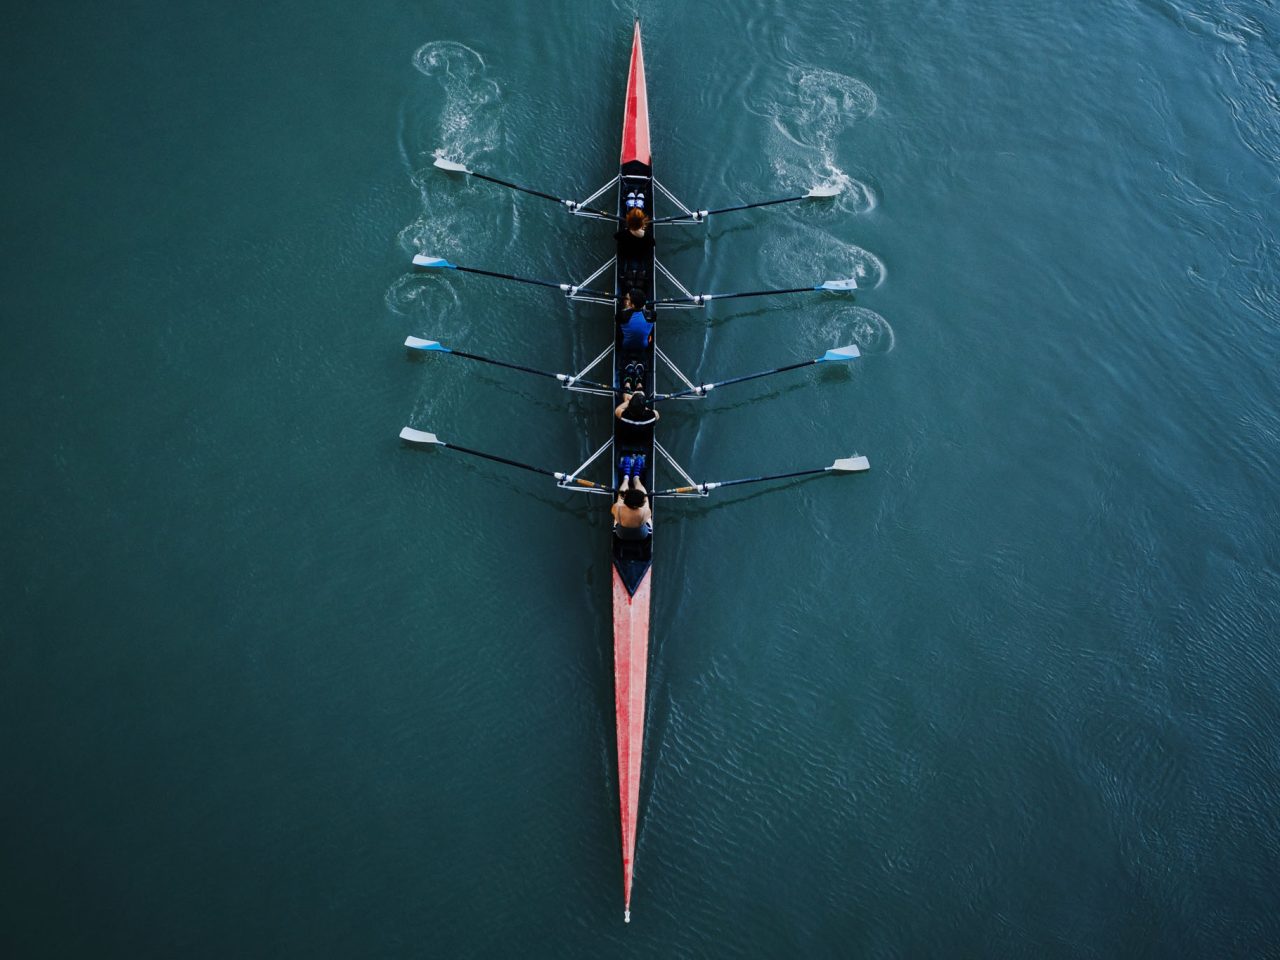 Kayak from above with 4 rowing people. Blue and aqua water background. Sport and moving concept. Red kayak and 8 paddles.